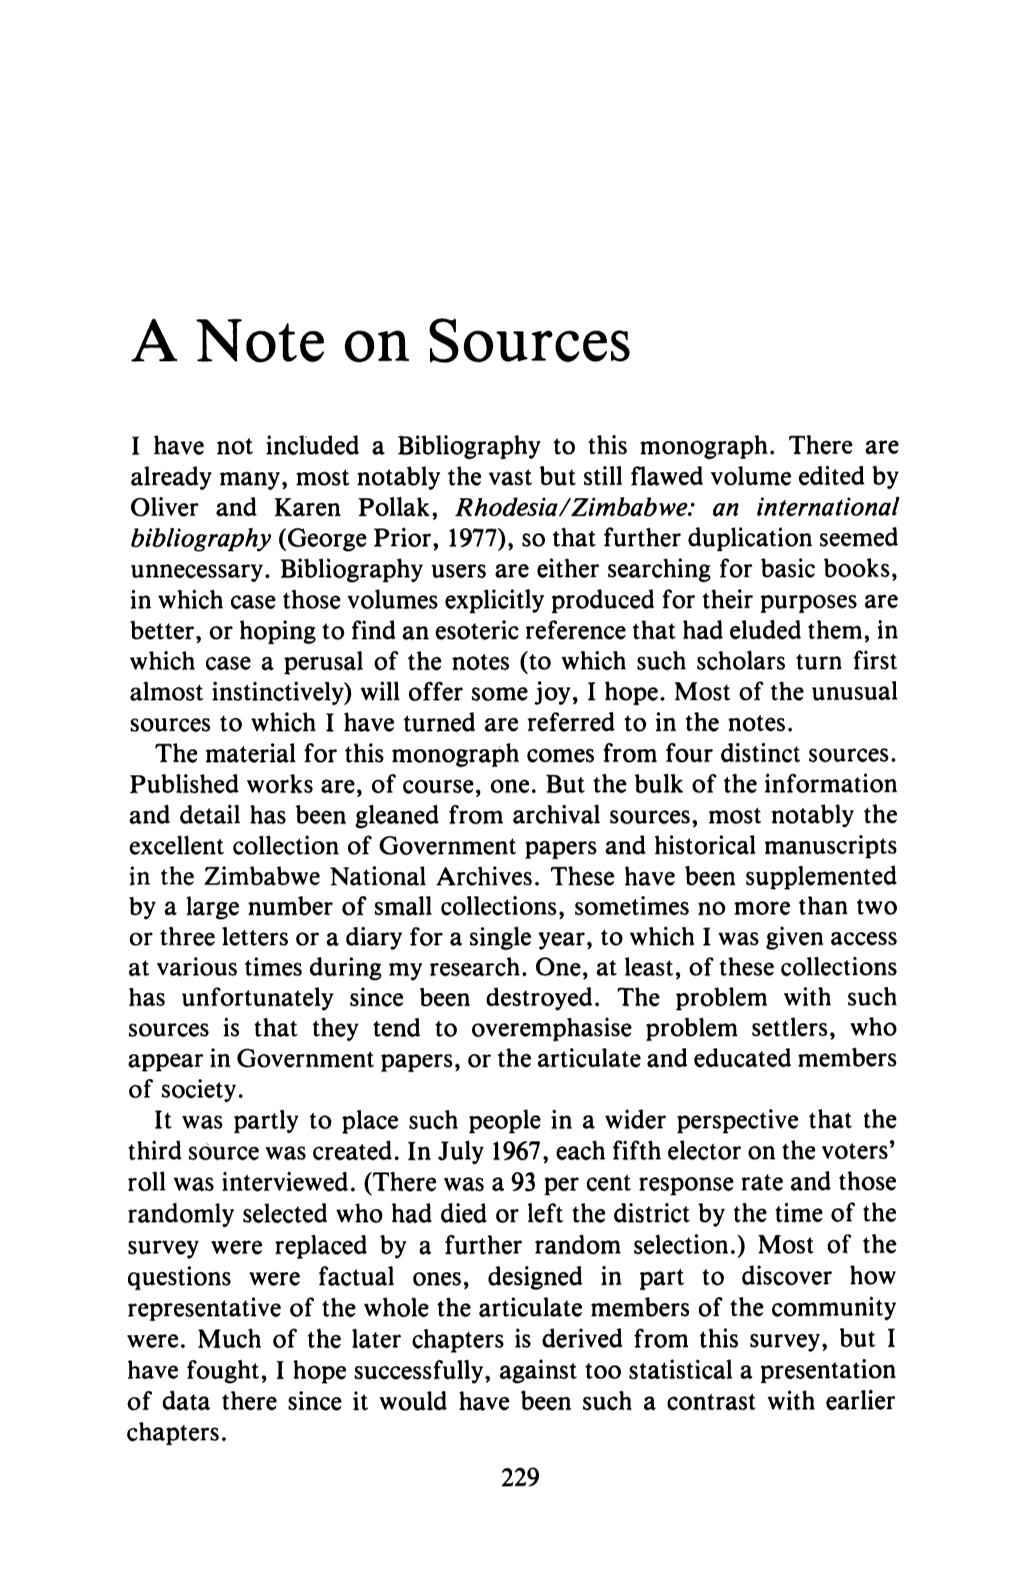 A Note on Sources